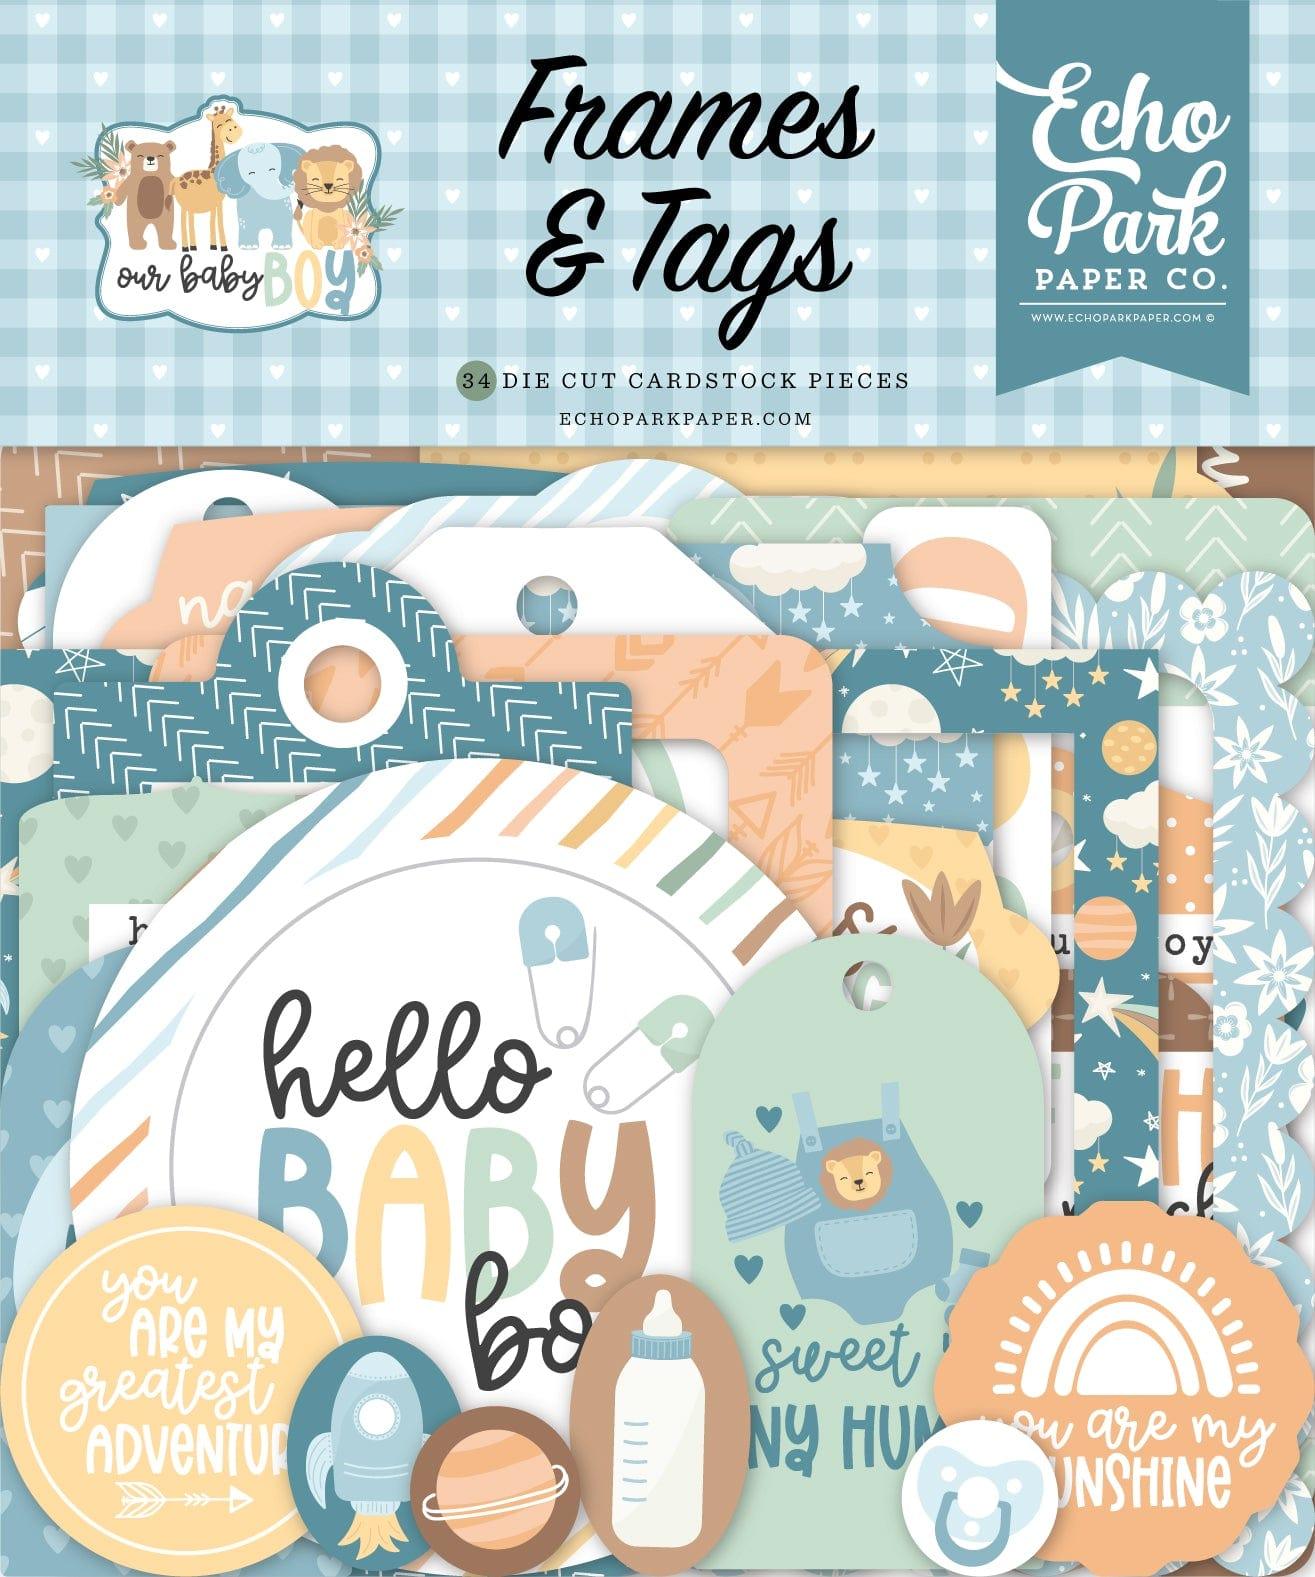 Our Baby Boy Collection 5 x 5 Scrapbook Tags & Frames Die Cuts by Echo Park Paper - Scrapbook Supply Companies